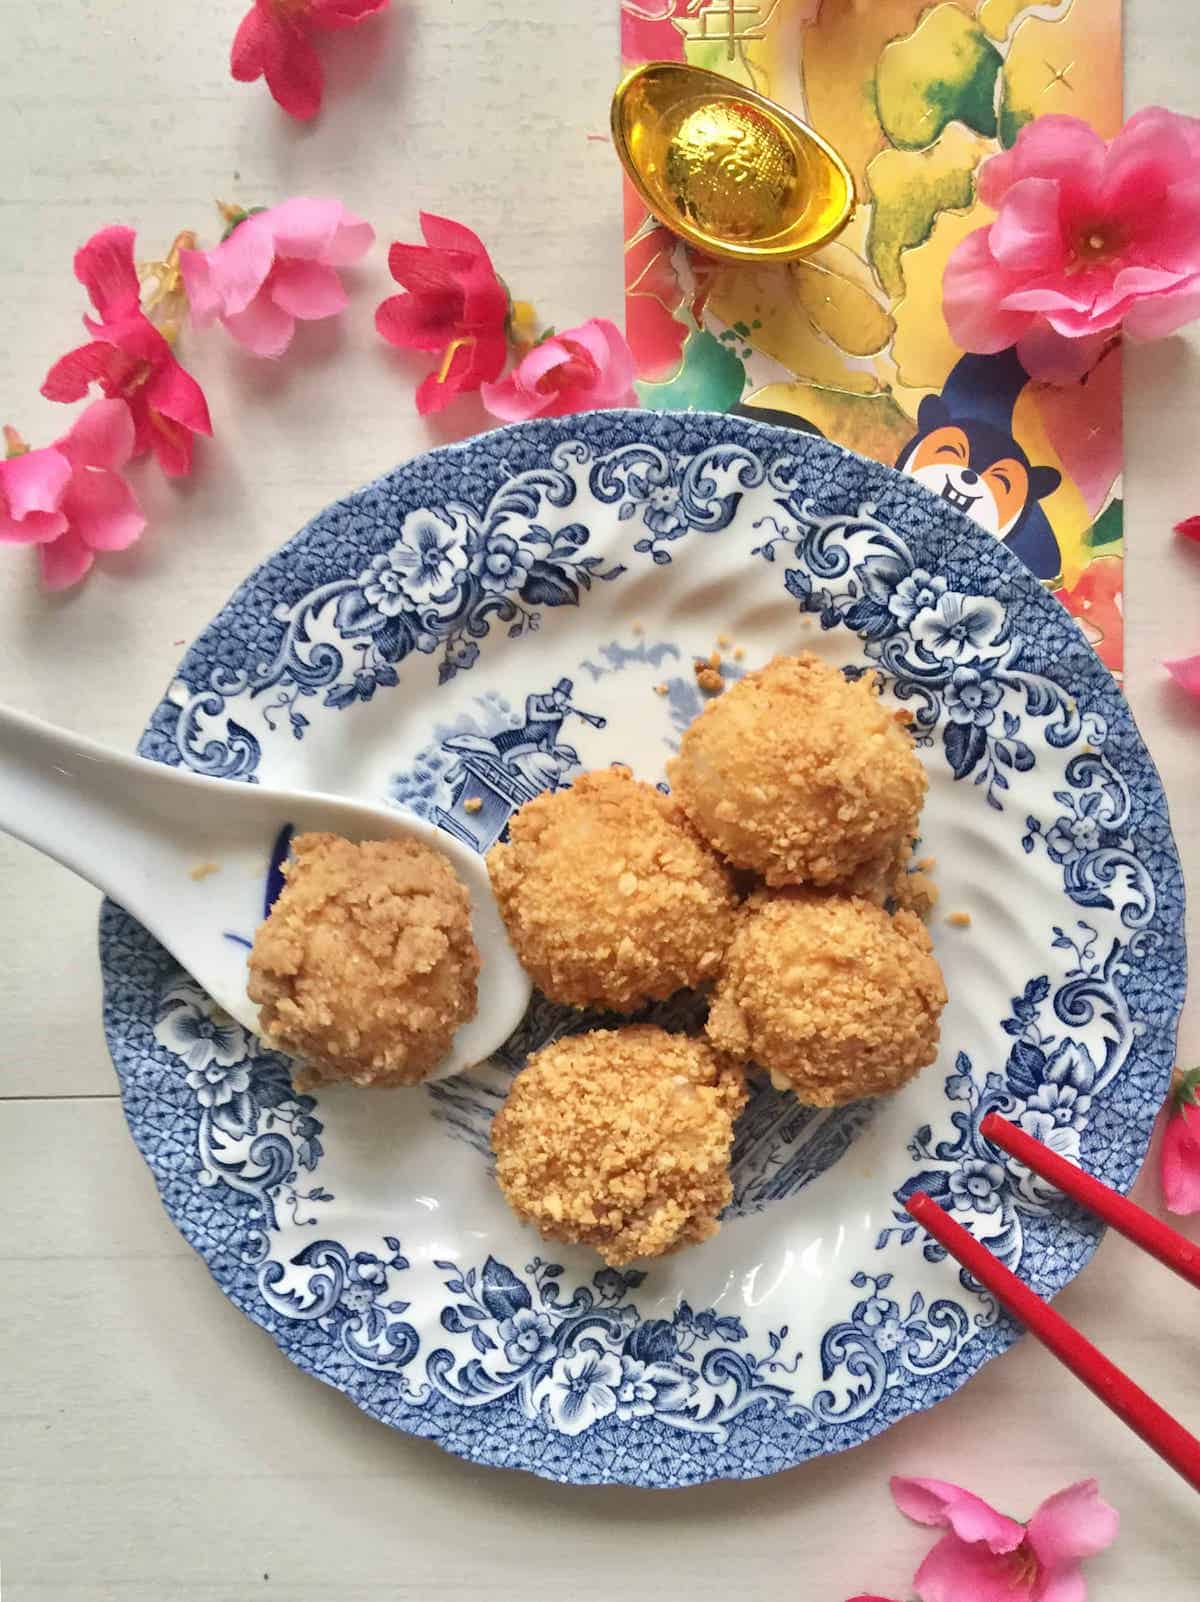 4 glutinous rice dumpling balls coated with ground roasted peanut on a blue and white plate wit Chinese New Year decor all around